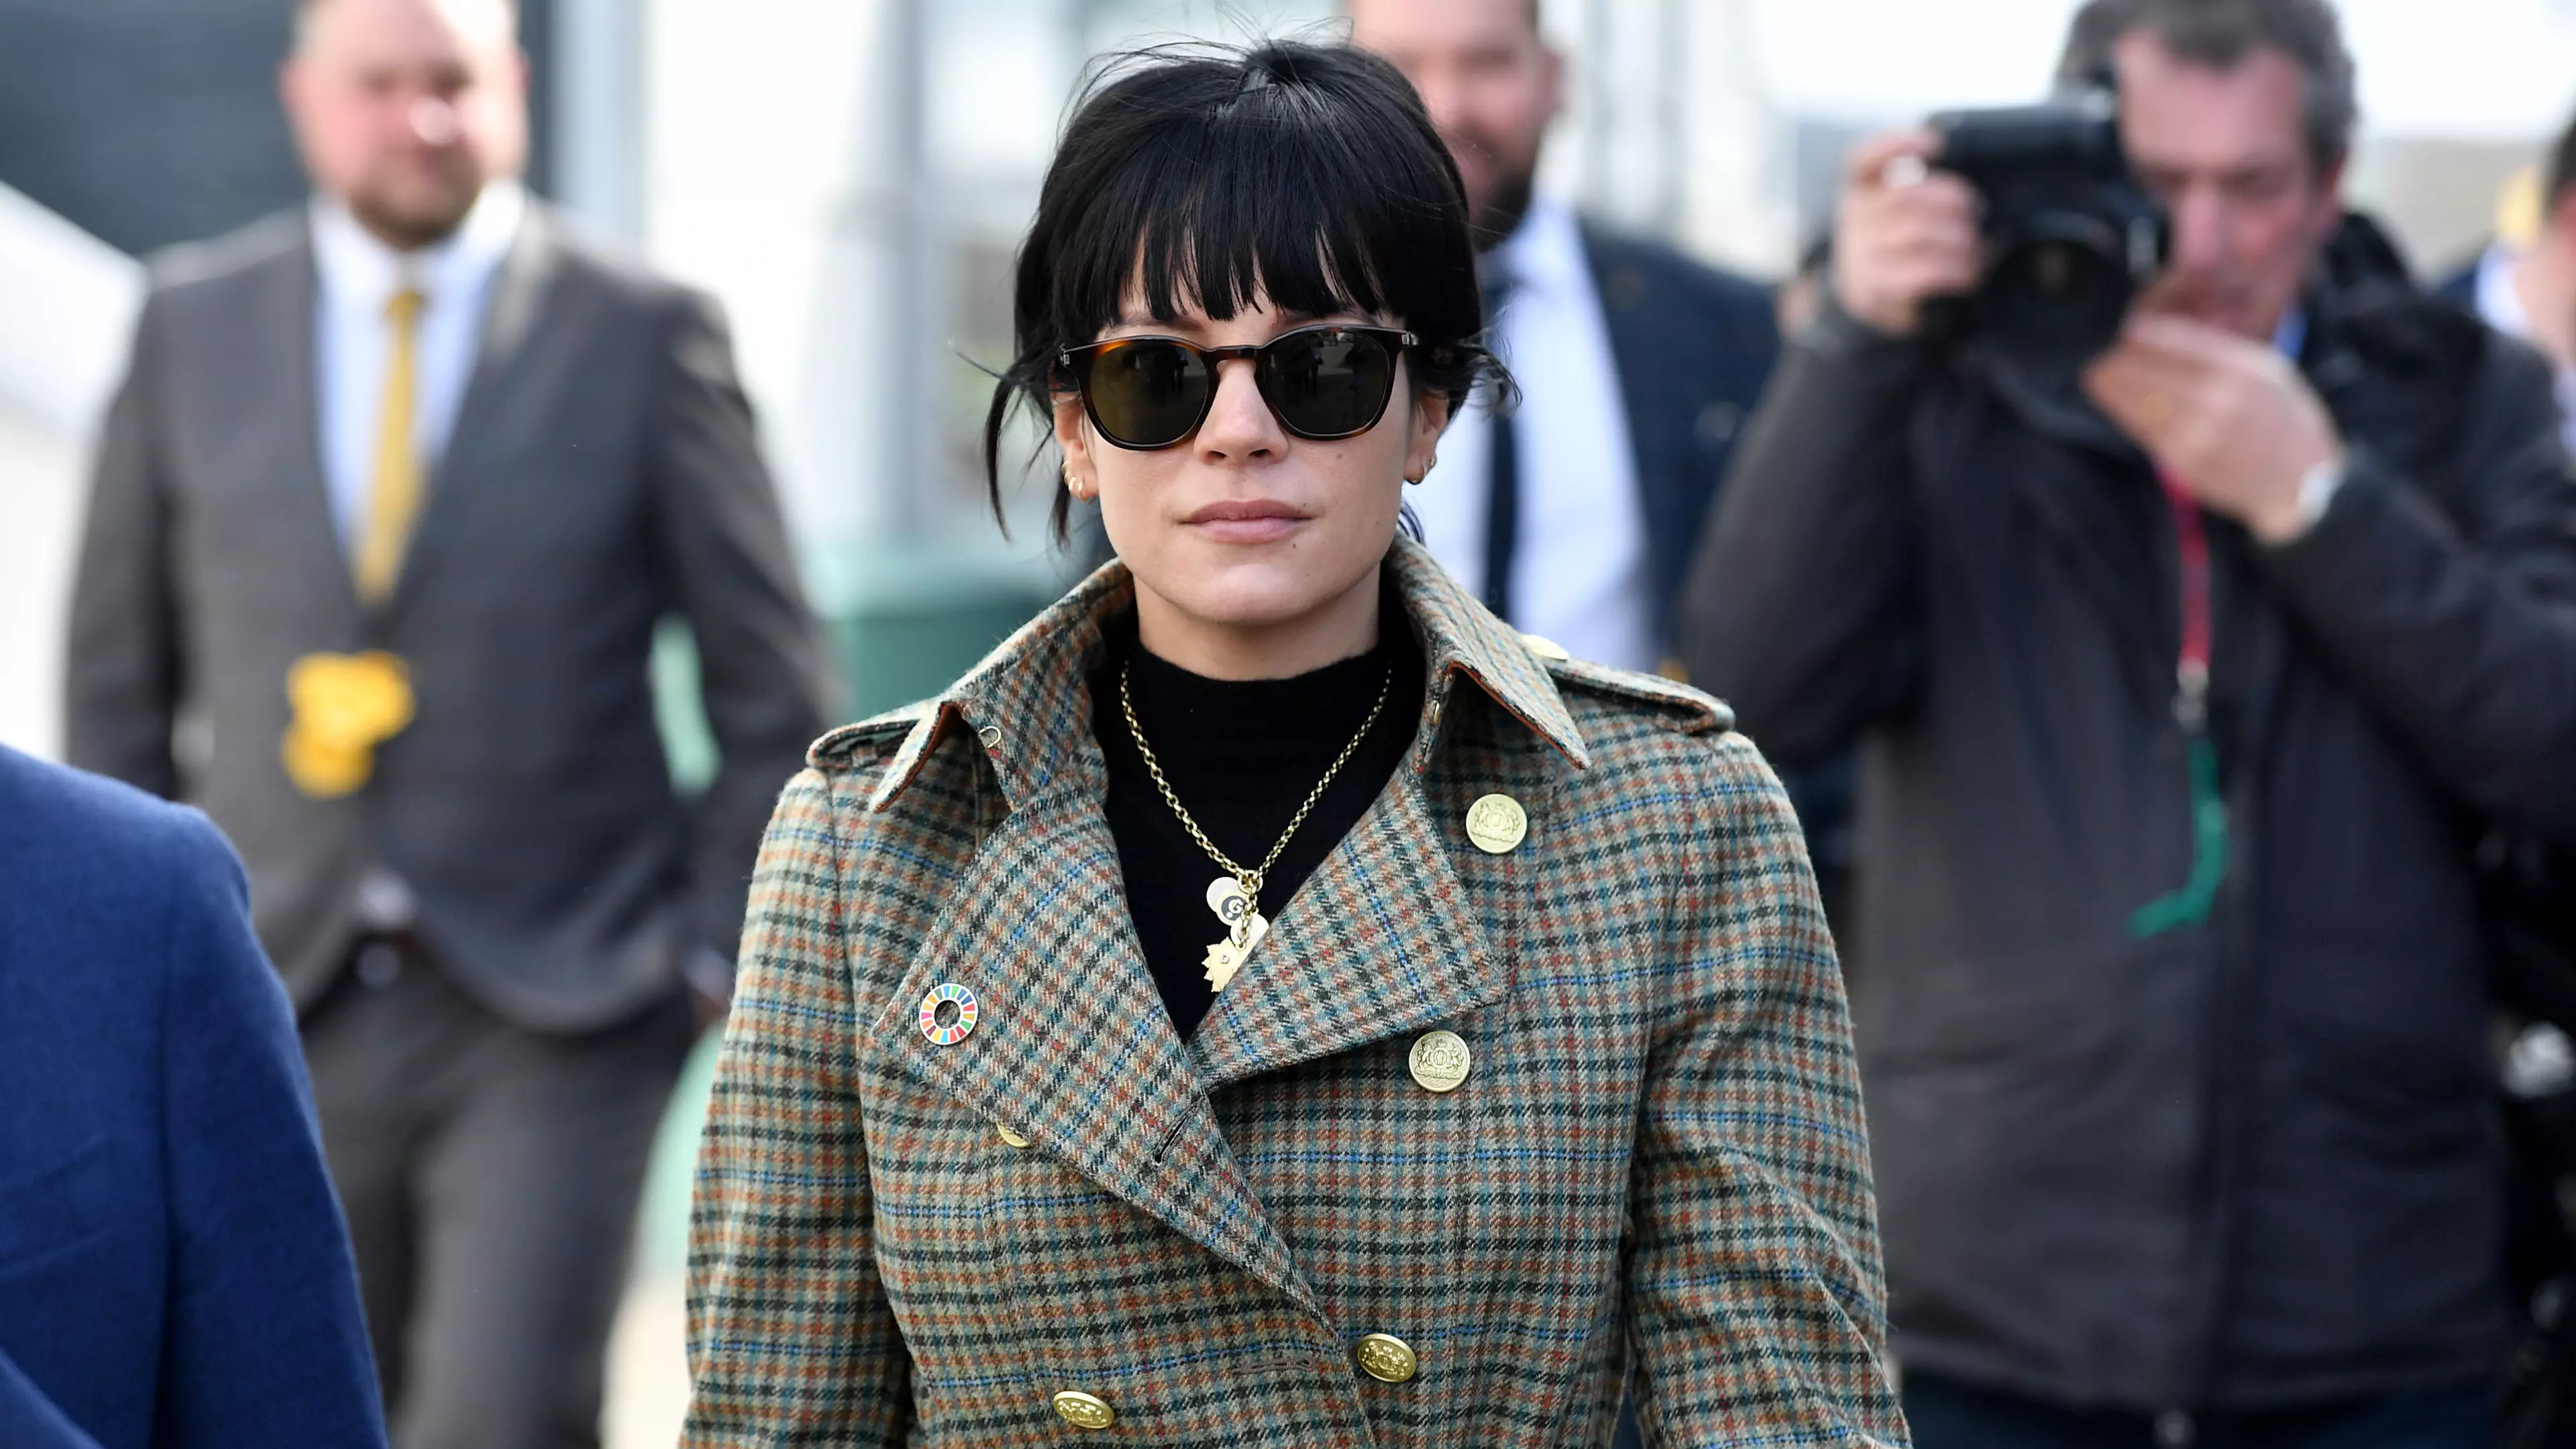 Lily Allen Says She 'Considered Taking Heroin' During Miley Cyrus Tour